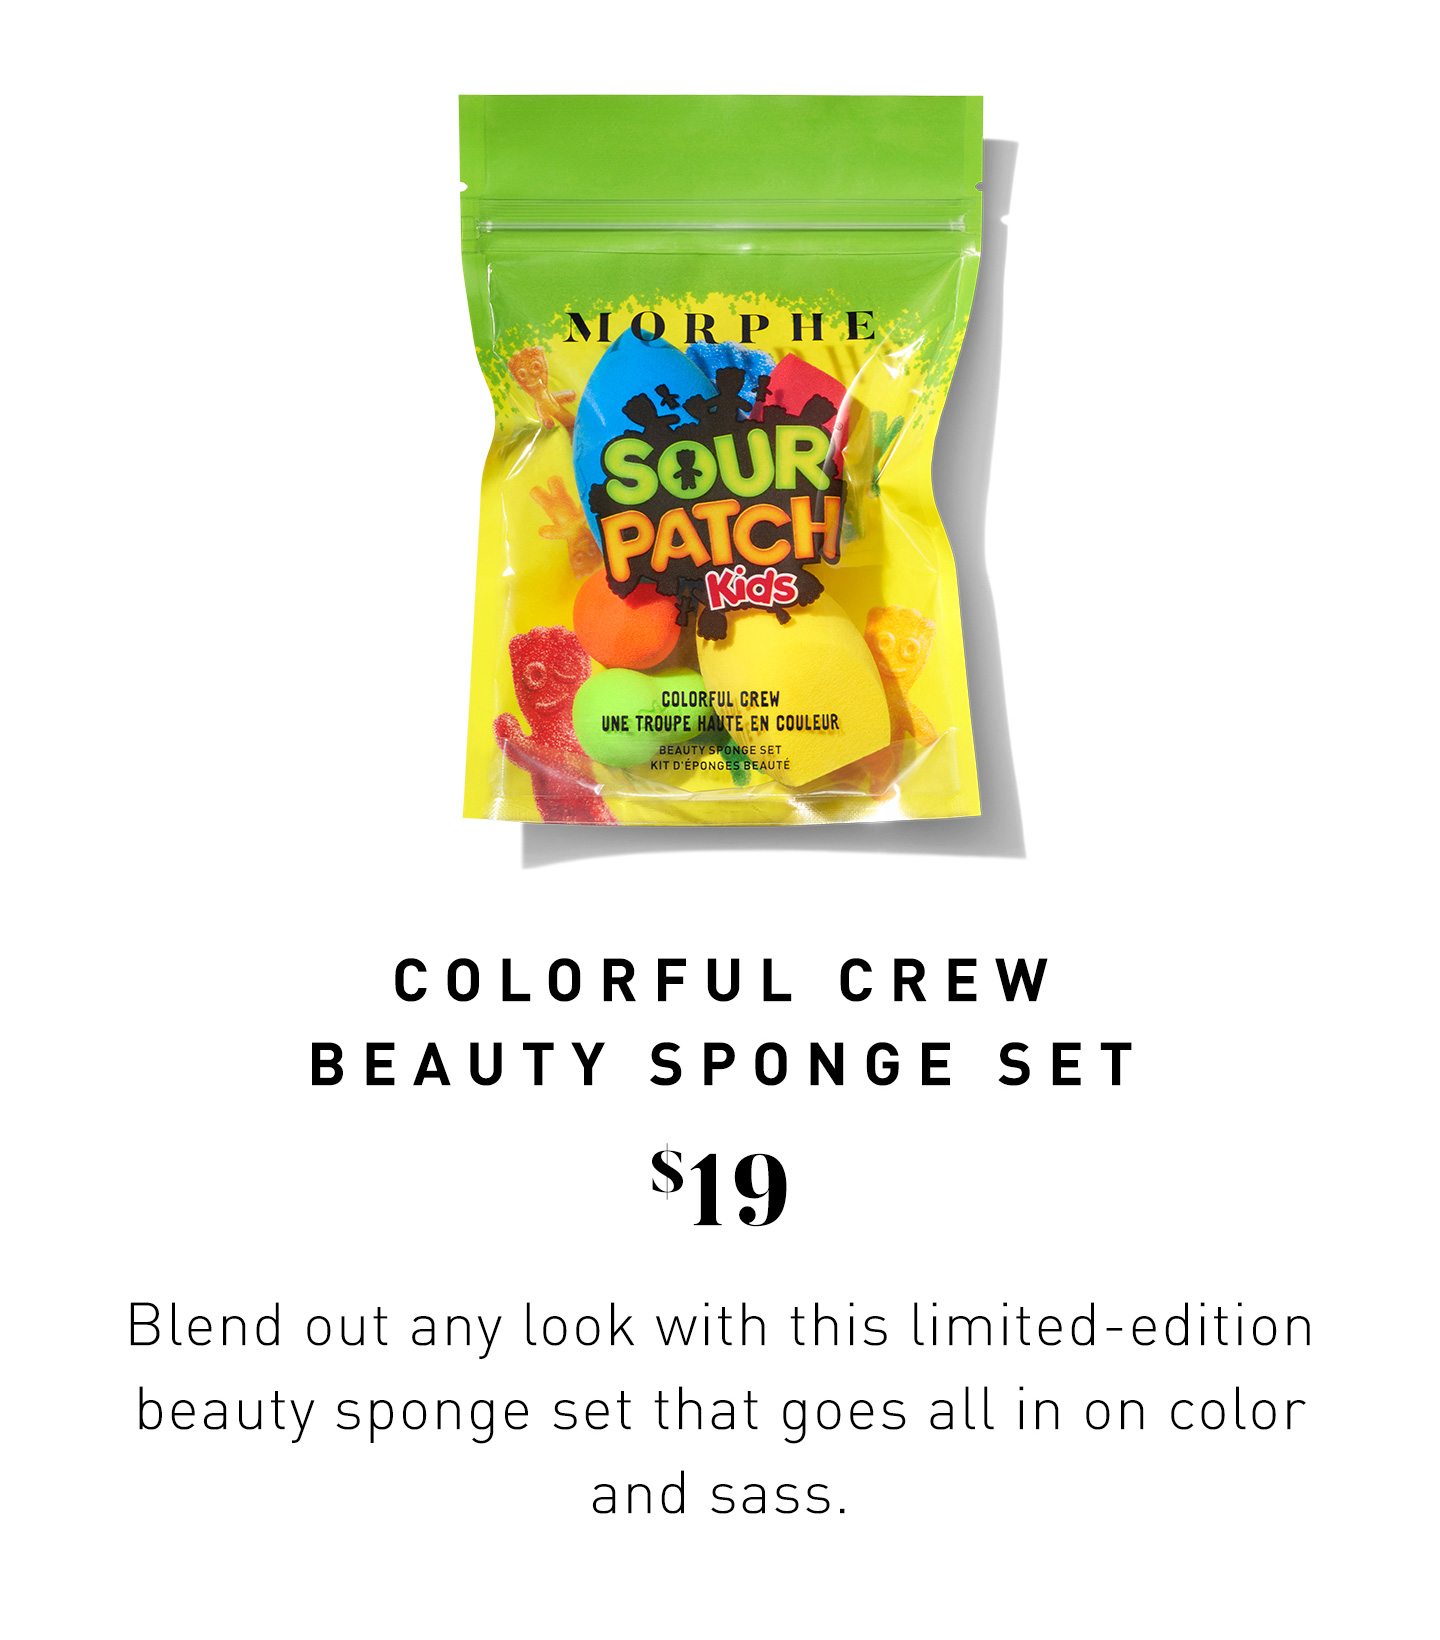 COLORFUL CREW BEAUTY SPONGE SET $19 Blend out any look with this limited-edition beauty sponge set that goes all in on color and sass.